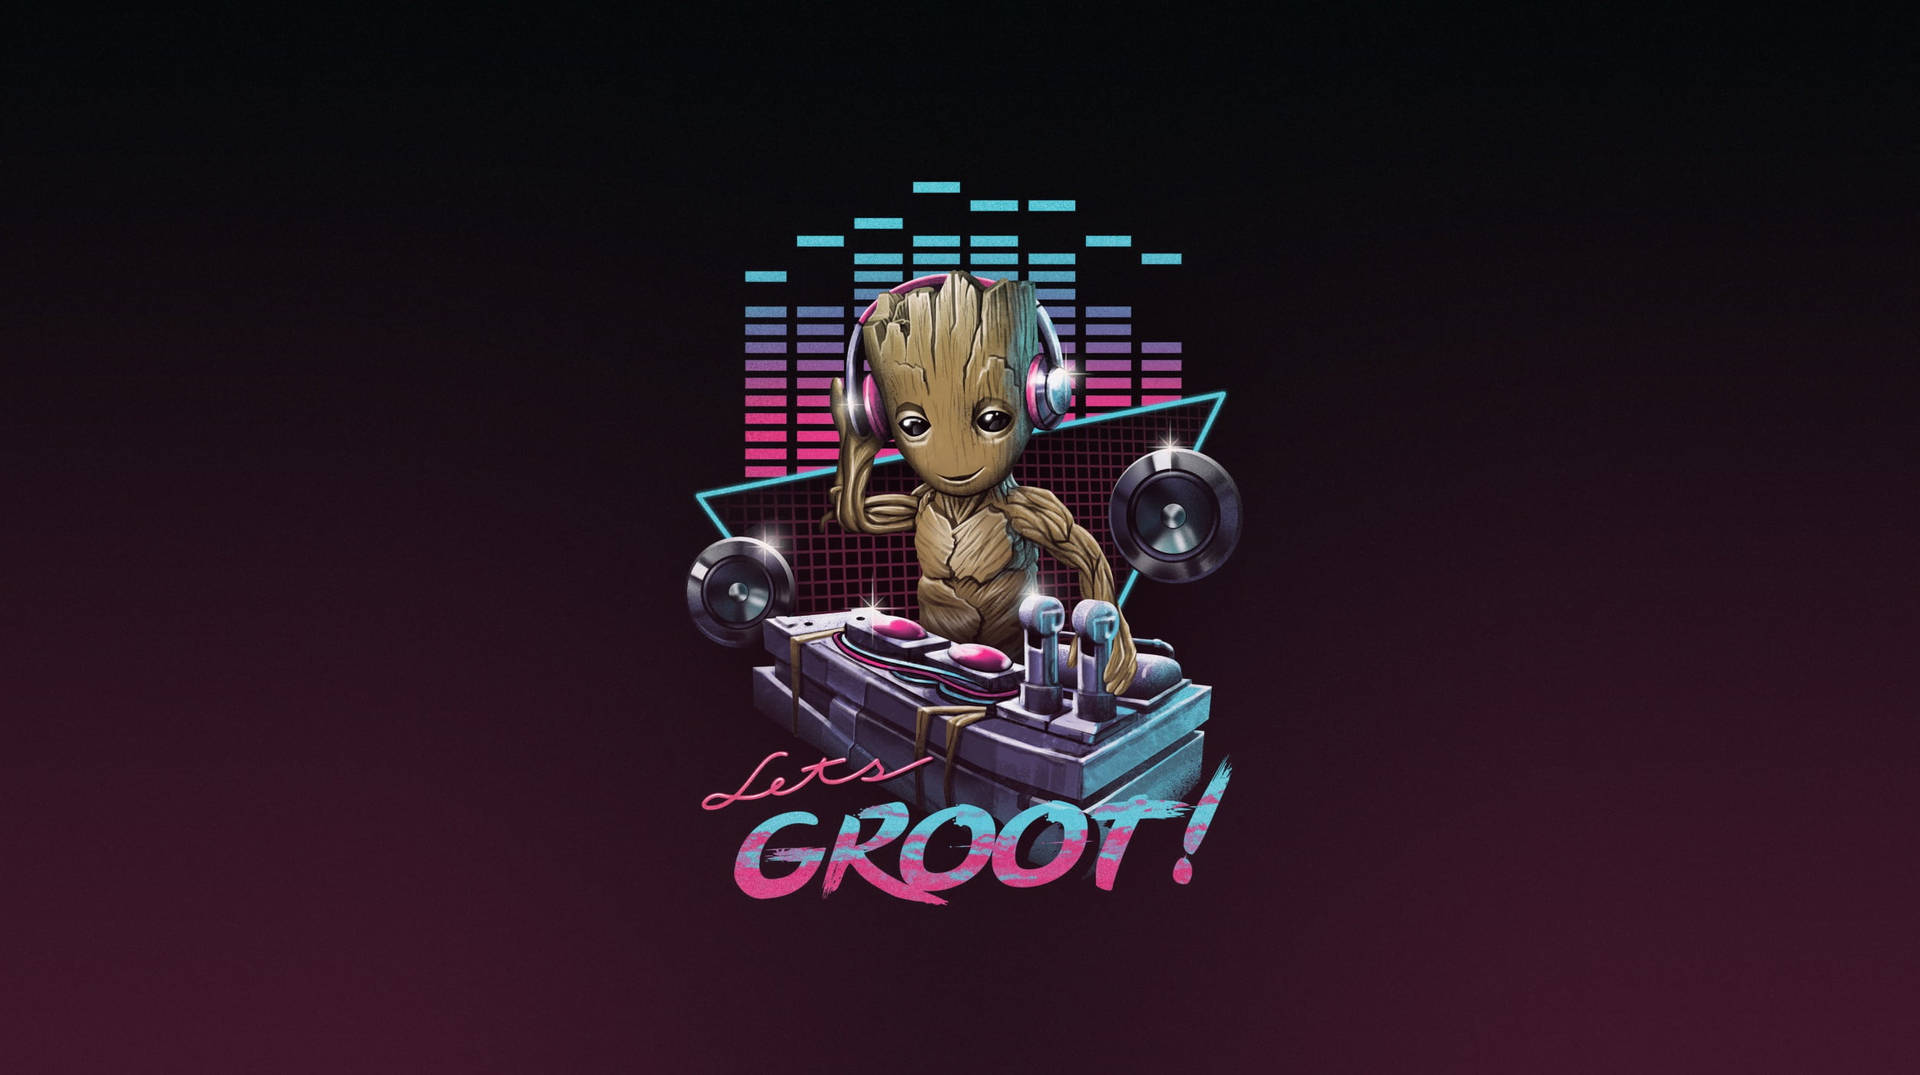 Free Groot Wallpaper Downloads, [100+] Groot Wallpapers for FREE |  